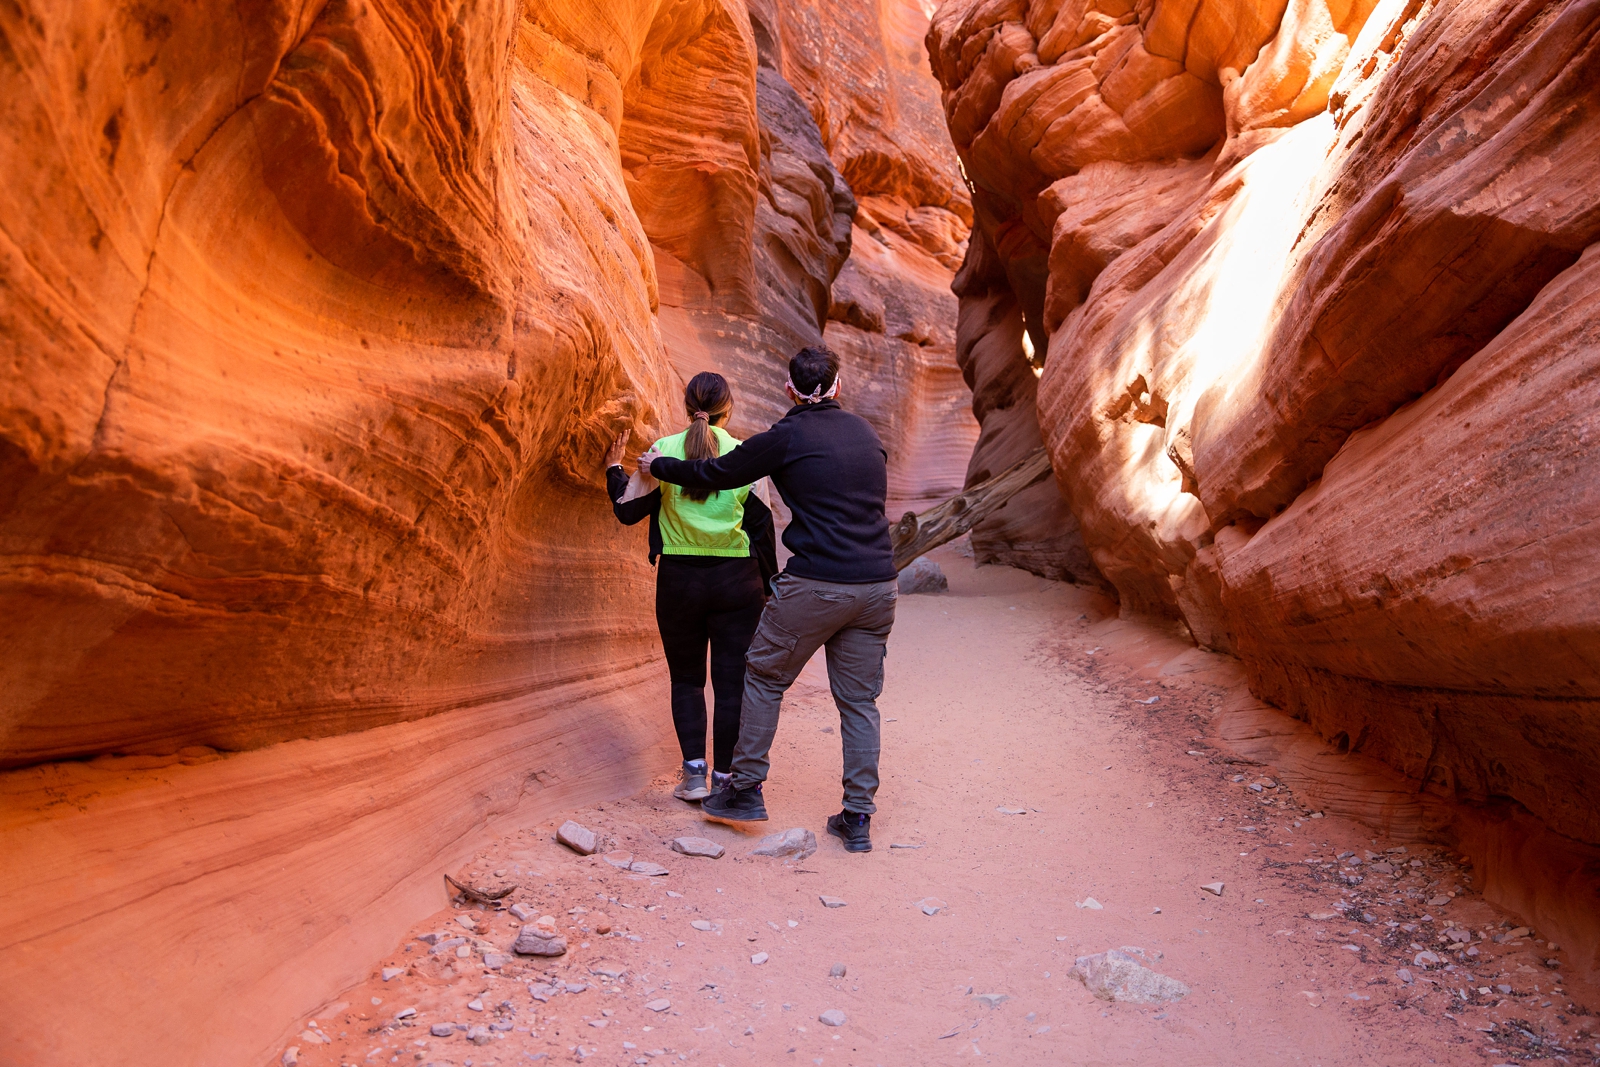 A guy grabbing his almost fiancé to move her to the middle of the slot canyon to propose to her